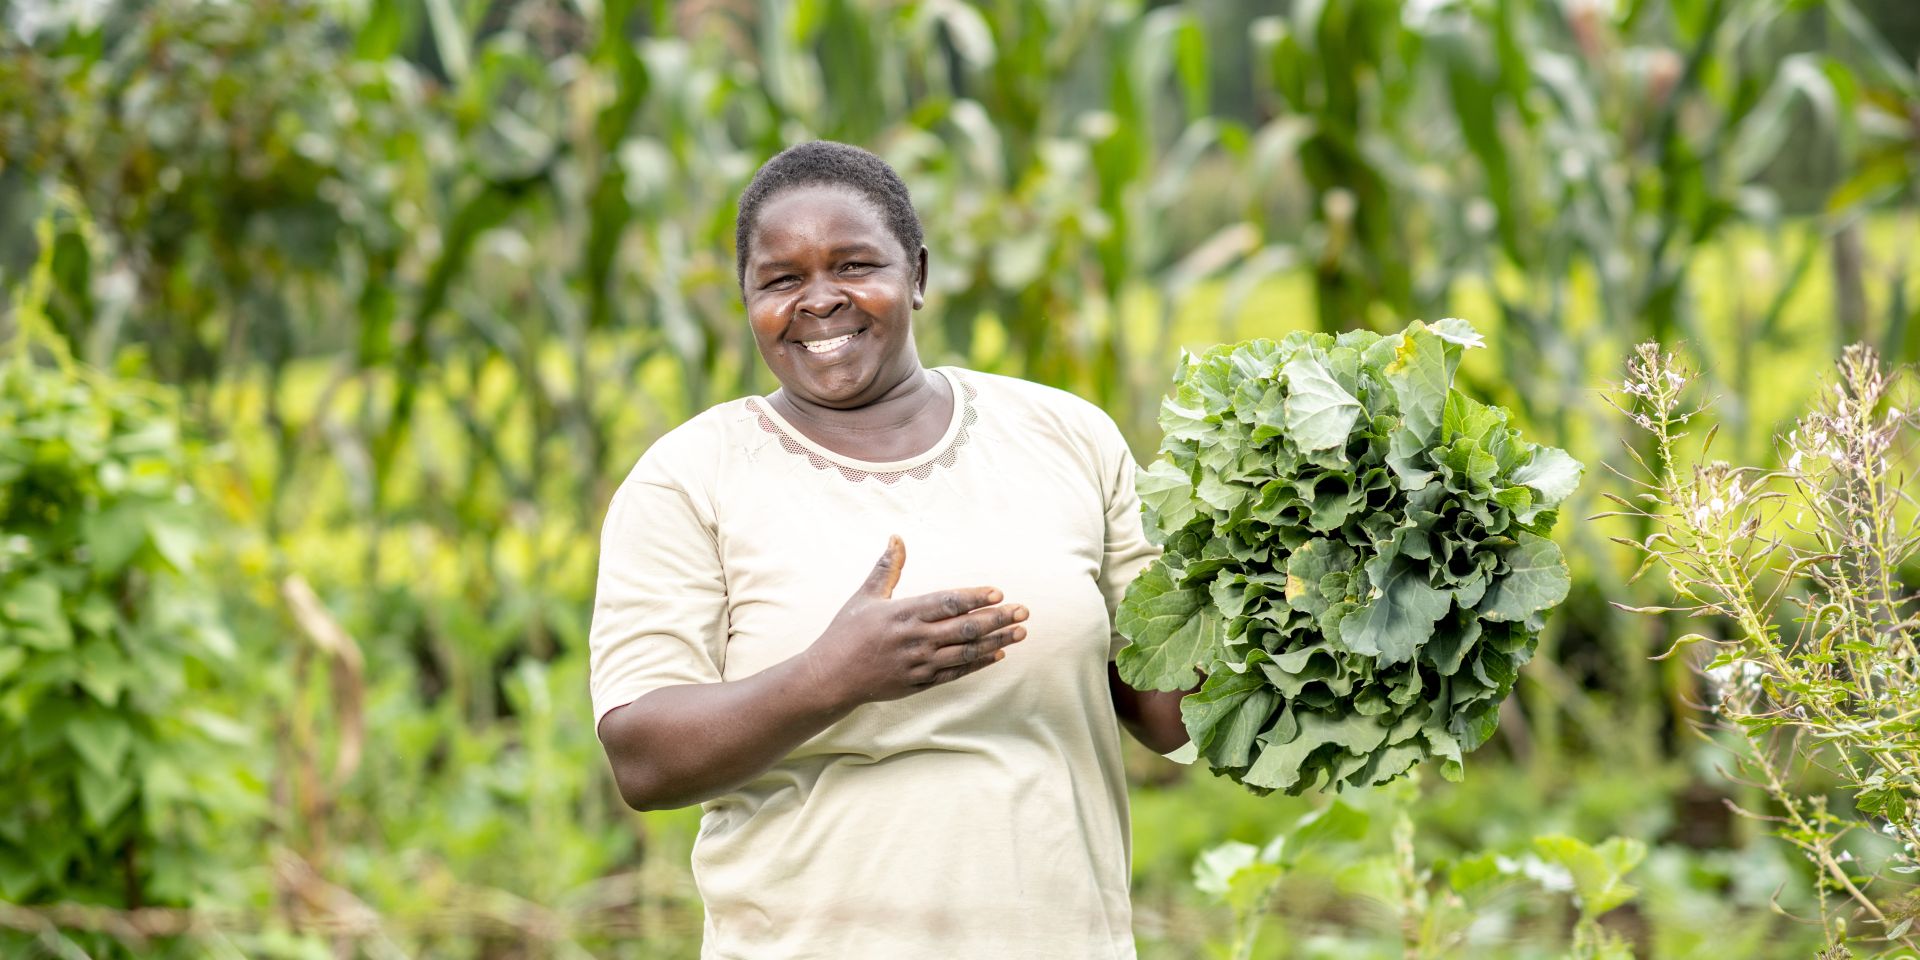 A farmer from Kapsabet, Kenya, stands holding a cabbage she's just harvested